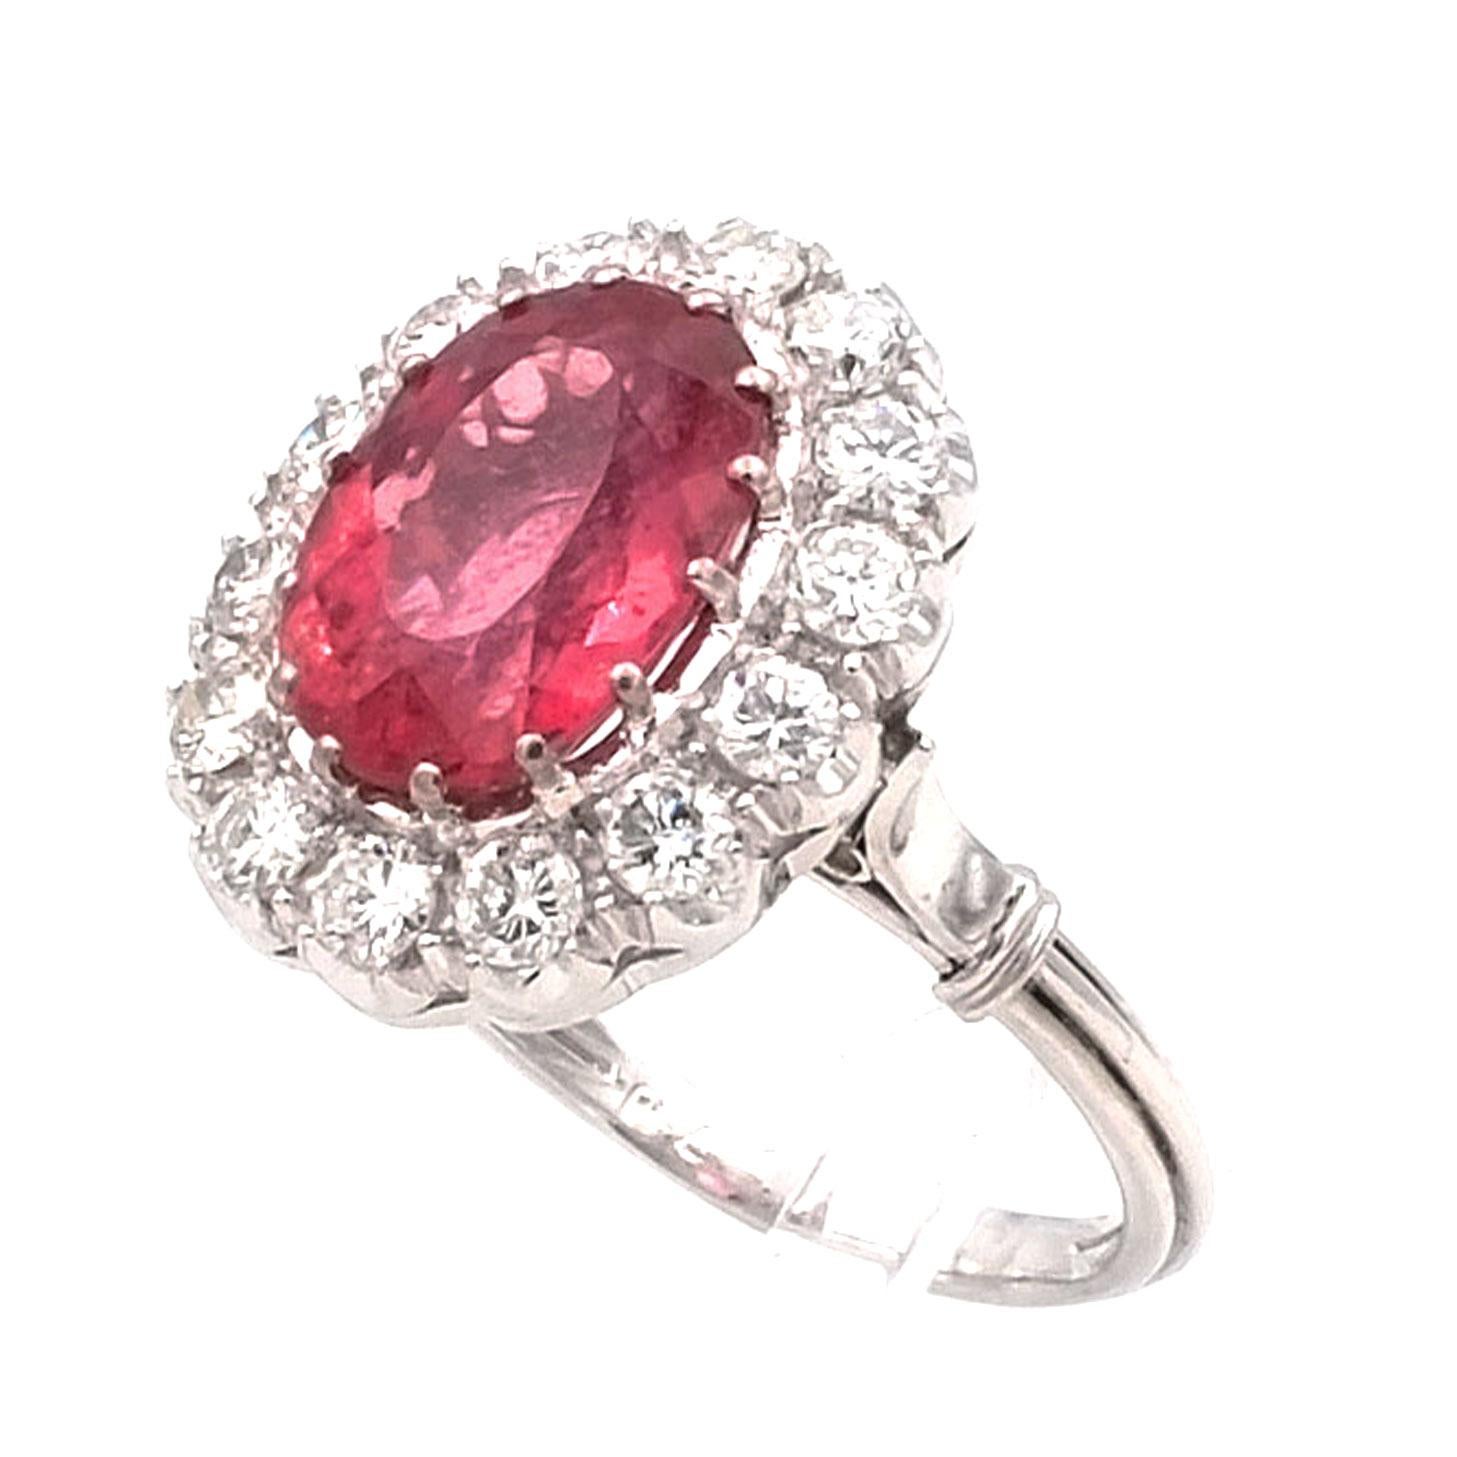 5.7 Carat Rubellite and 1.4 Carat Diamond White Gold Ring

Classically elegant diamond entourage ring, the face set with an oval pink rubellite of 5.7 ct surrounded by a wreath of 14 brilliant diamonds with a total of 1.4 ct, in a lattice-like